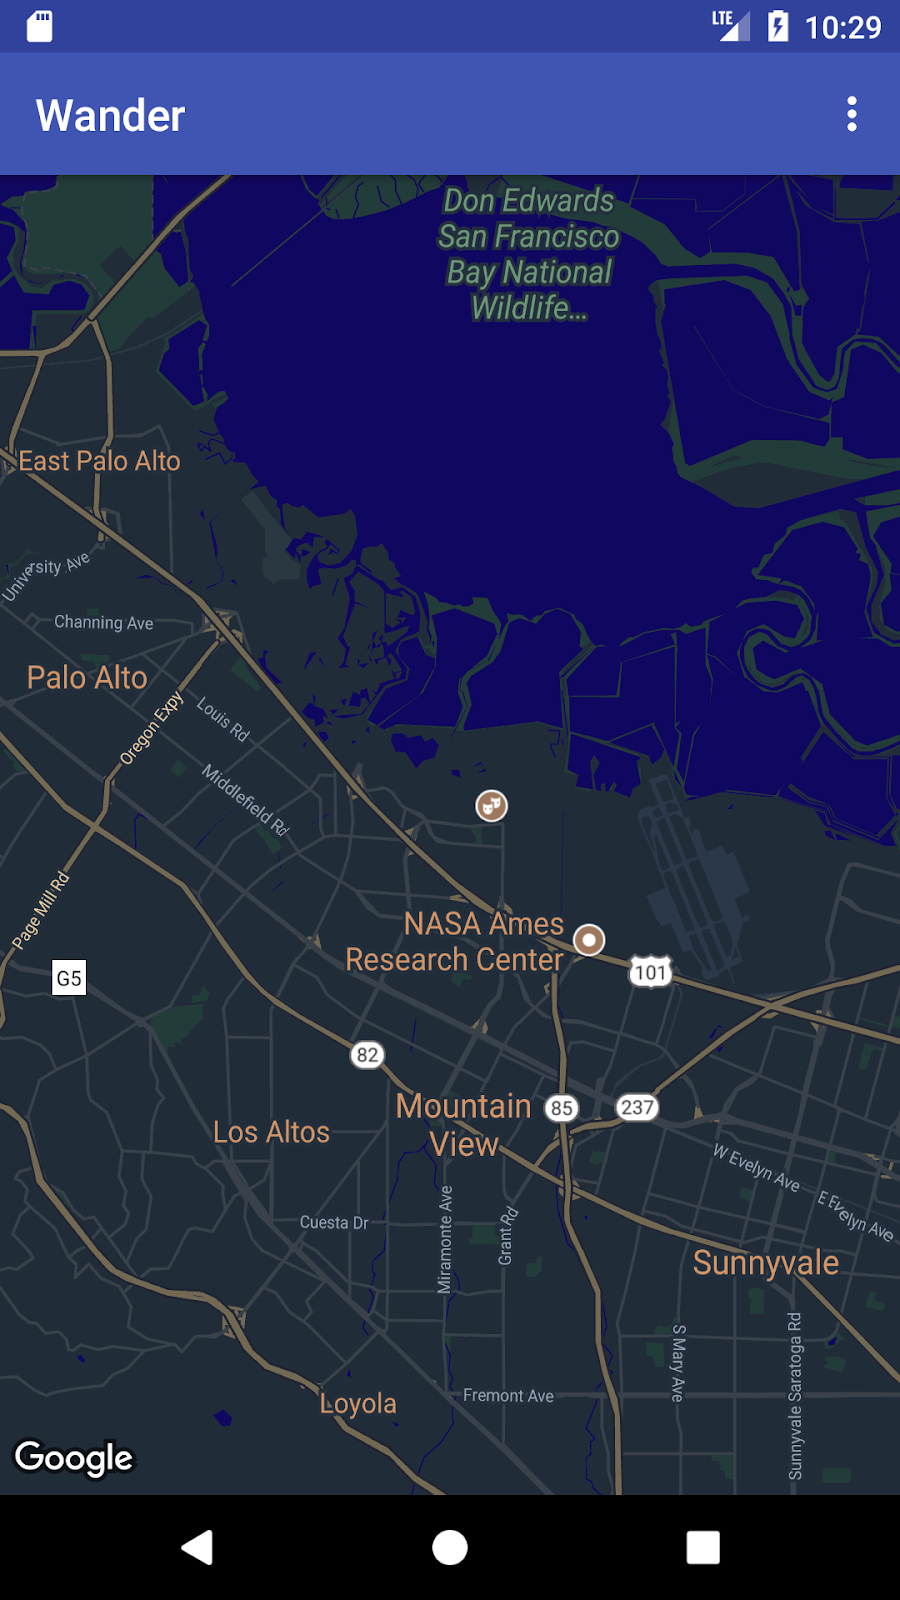 Google Map in night mode style